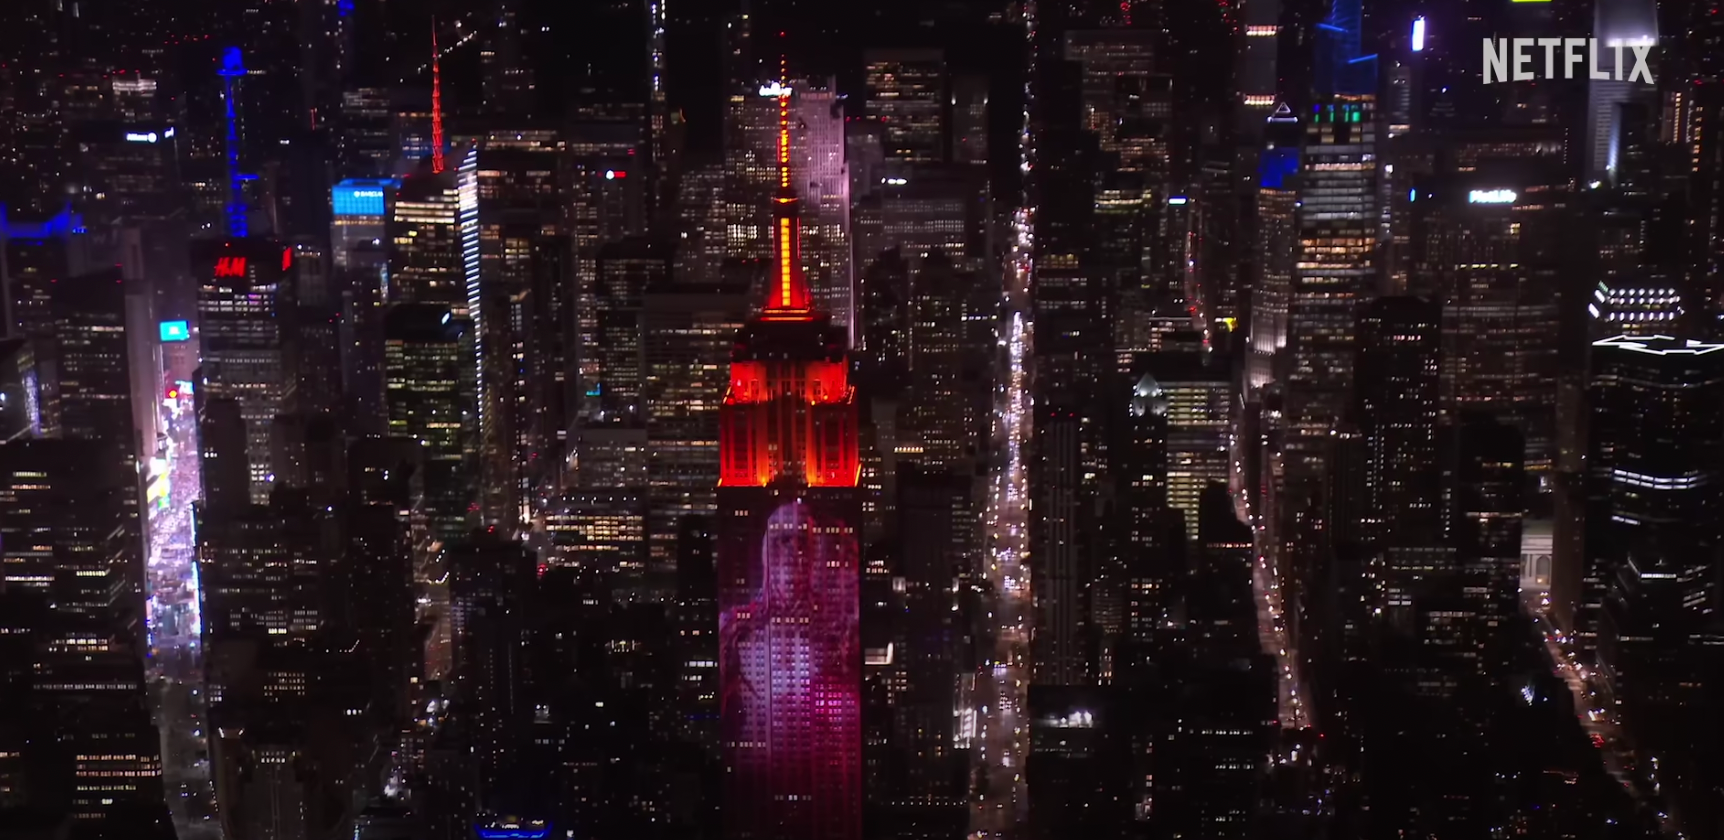 Empire State Building lit up with a Stranger Things marketing experience